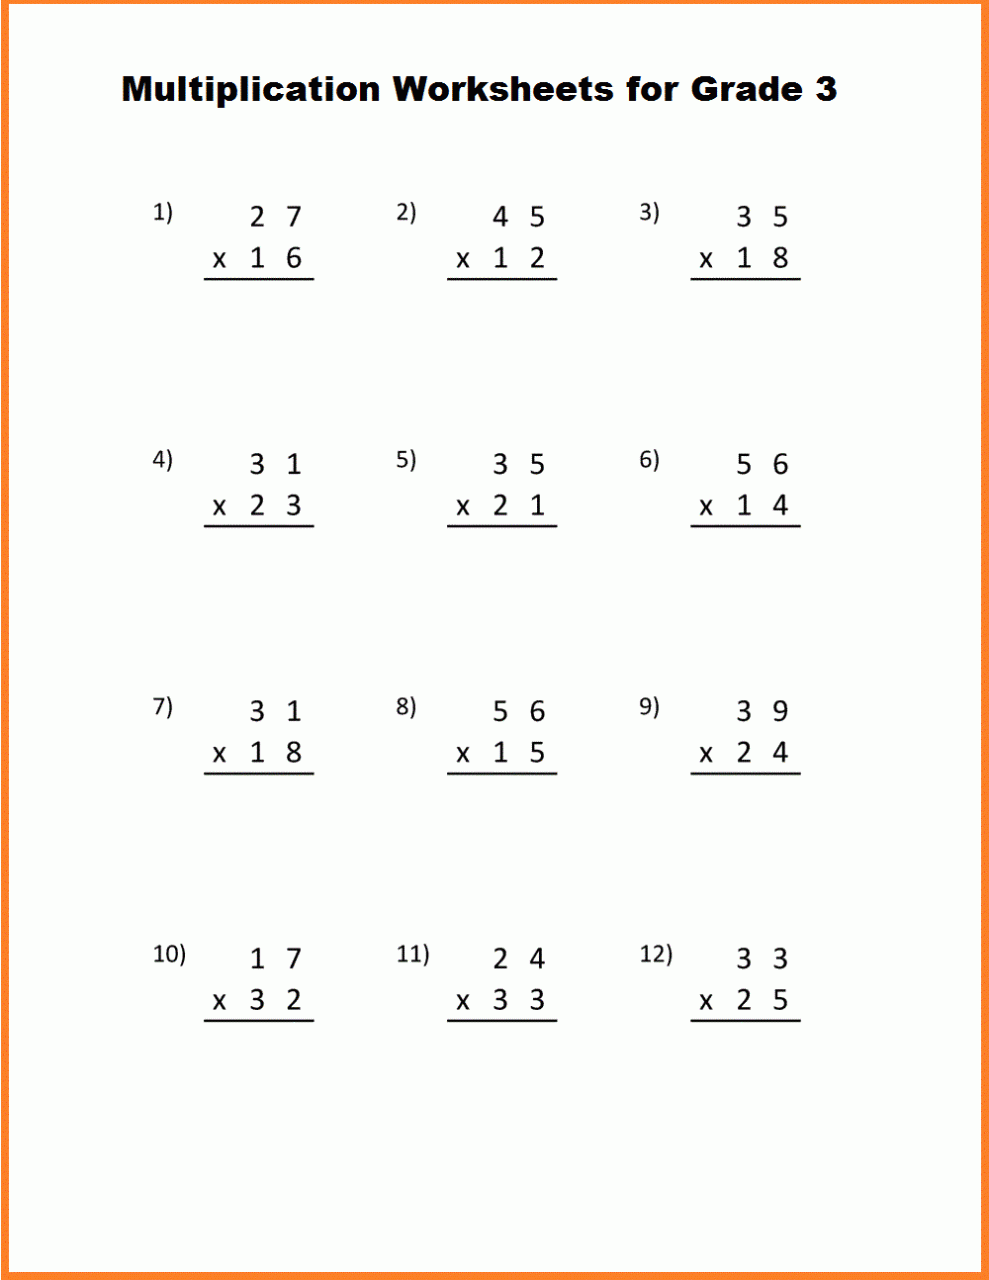 Multiplication Worksheets Grade 3 With Answers